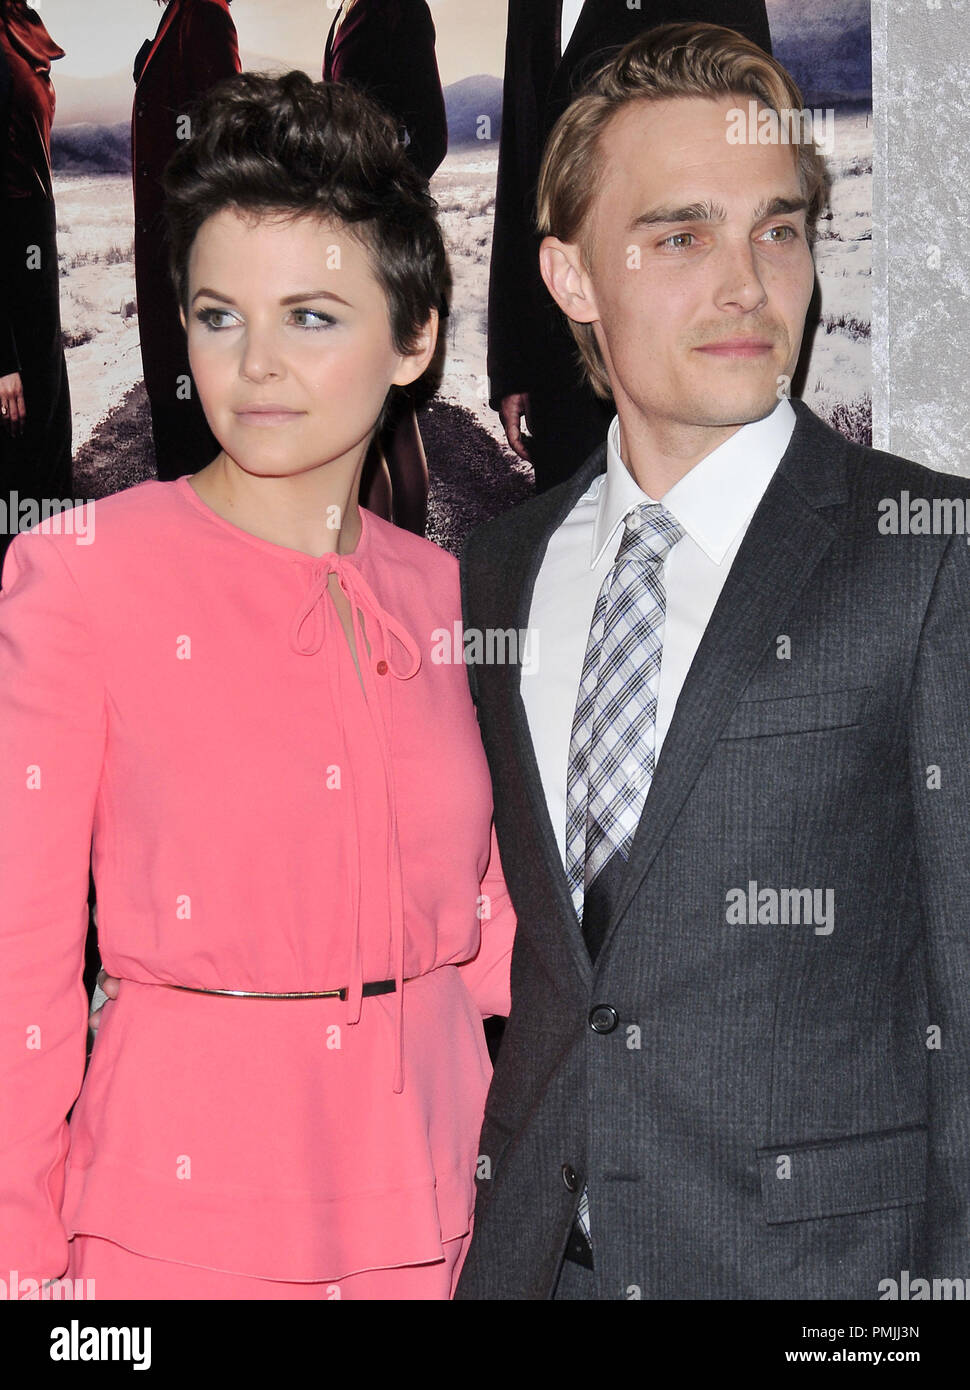 Ginnifer Goodwin & fiance Joey Kern at HBO's 'Big Love' Season 5 Premiere held at the Directors Guild Of America in Los Angeles, CA. The event took place on Wednesday, January 12, 2011. Photo by PRPP Pacific Rim Photo Press / PictureLux Stock Photo